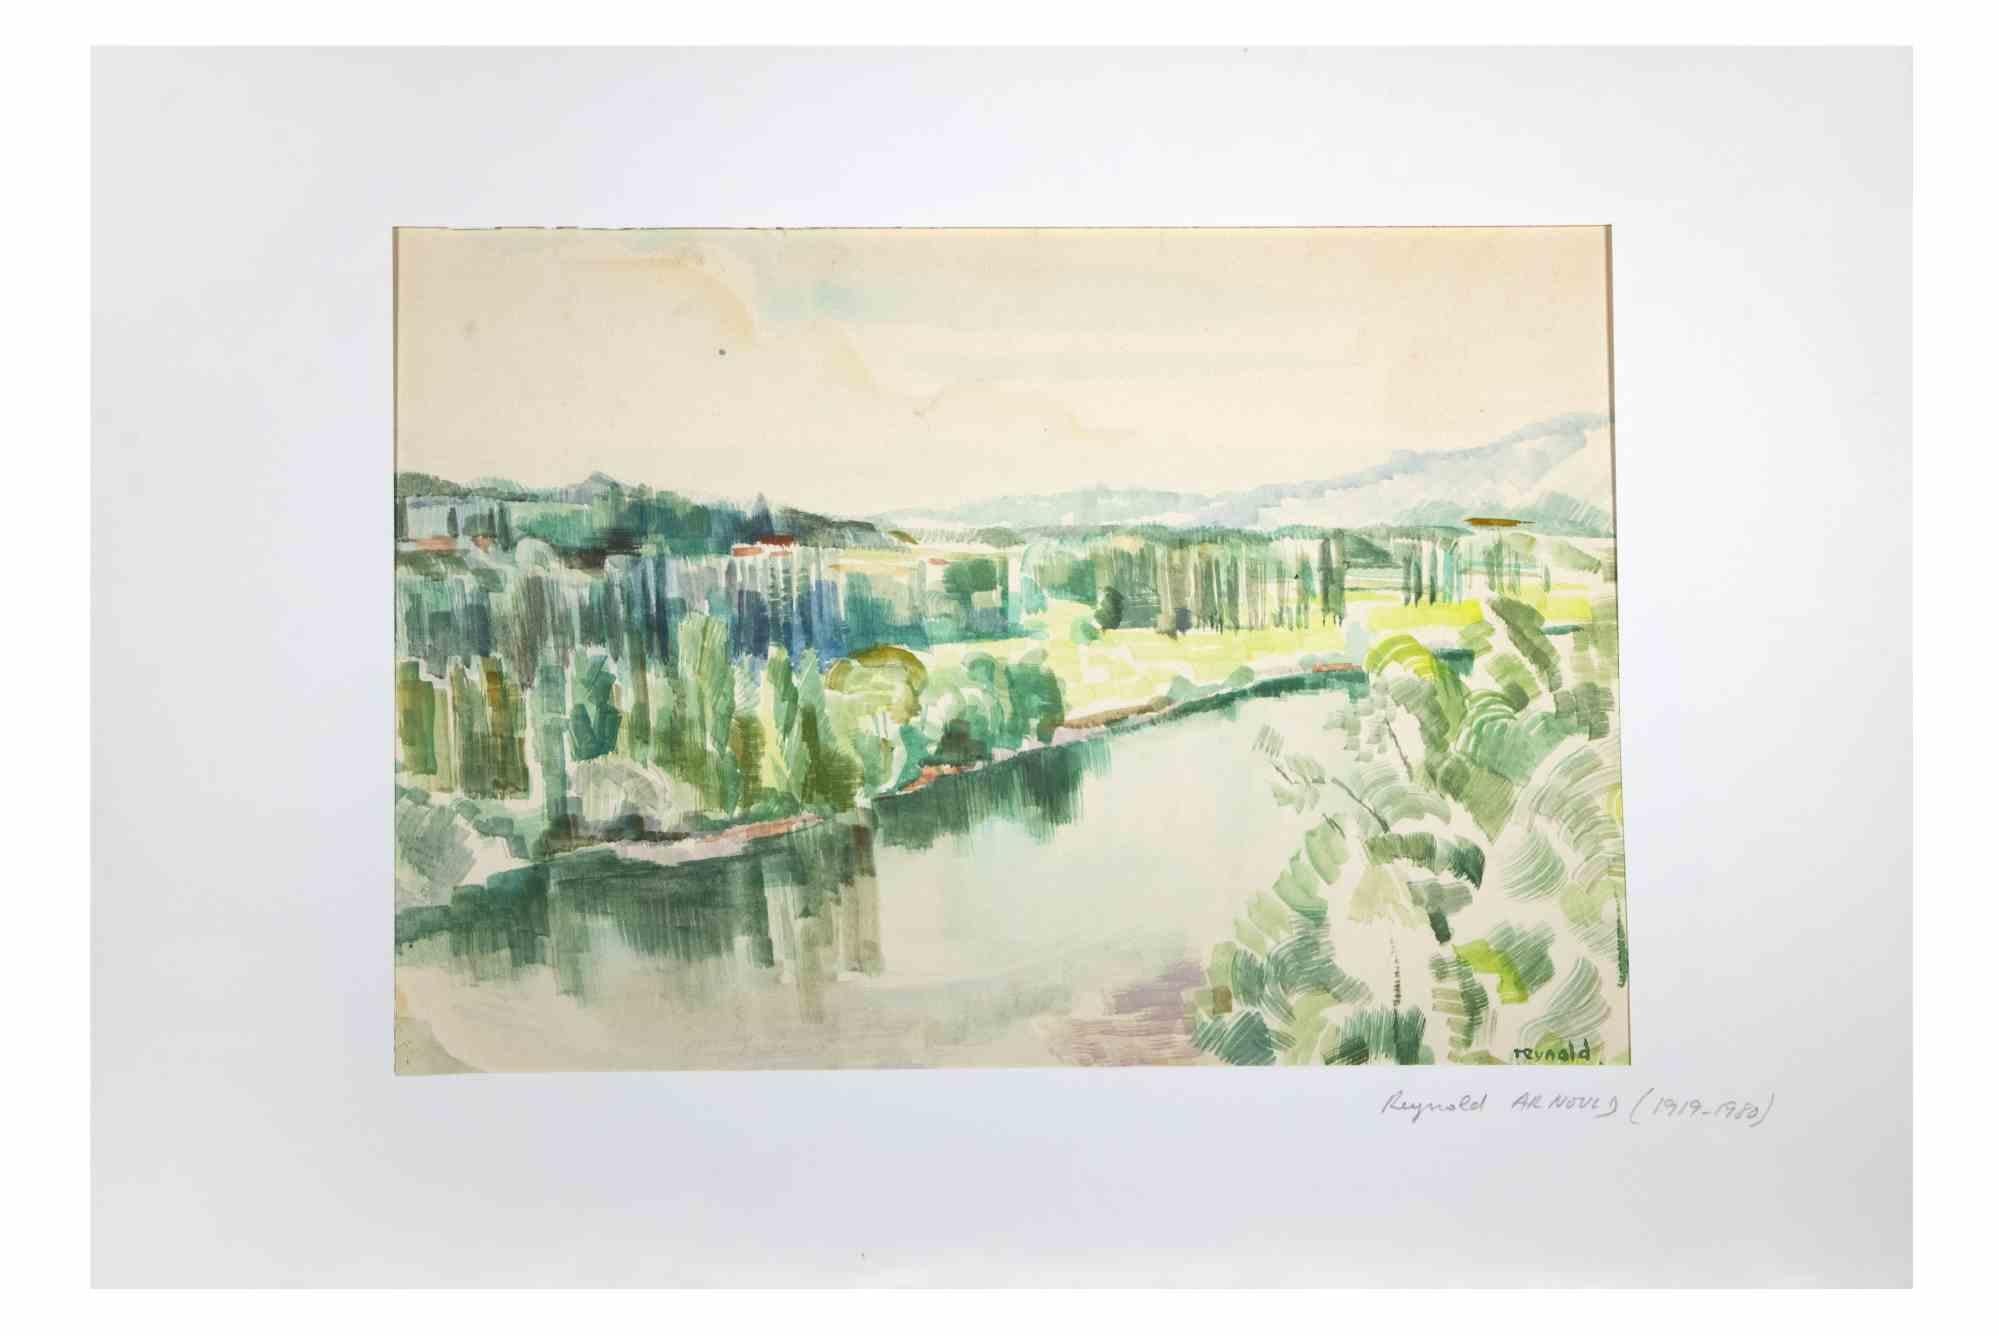 Landscape is a Watercolor artwork realized by Reynold Arnould  (Le Havre 1919 - Parigi 1980) in 1960.

Good condition included a white cardboard passpartout (35x51 cm).

Hand-signed by the artist on the lower right corner.

Reynold Arnould was born